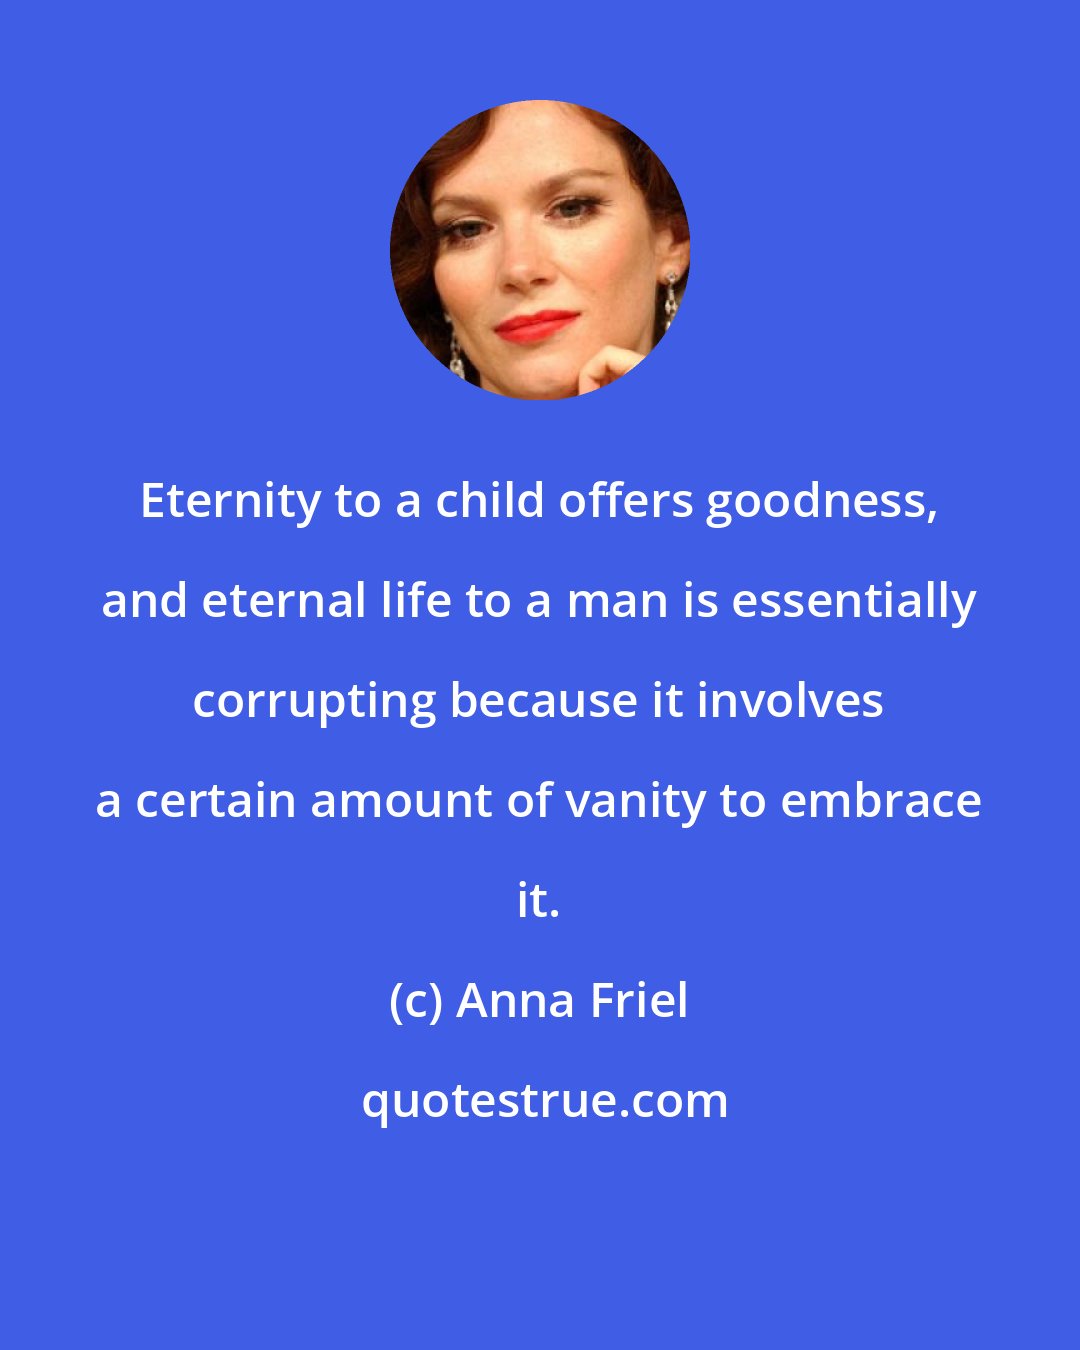 Anna Friel: Eternity to a child offers goodness, and eternal life to a man is essentially corrupting because it involves a certain amount of vanity to embrace it.